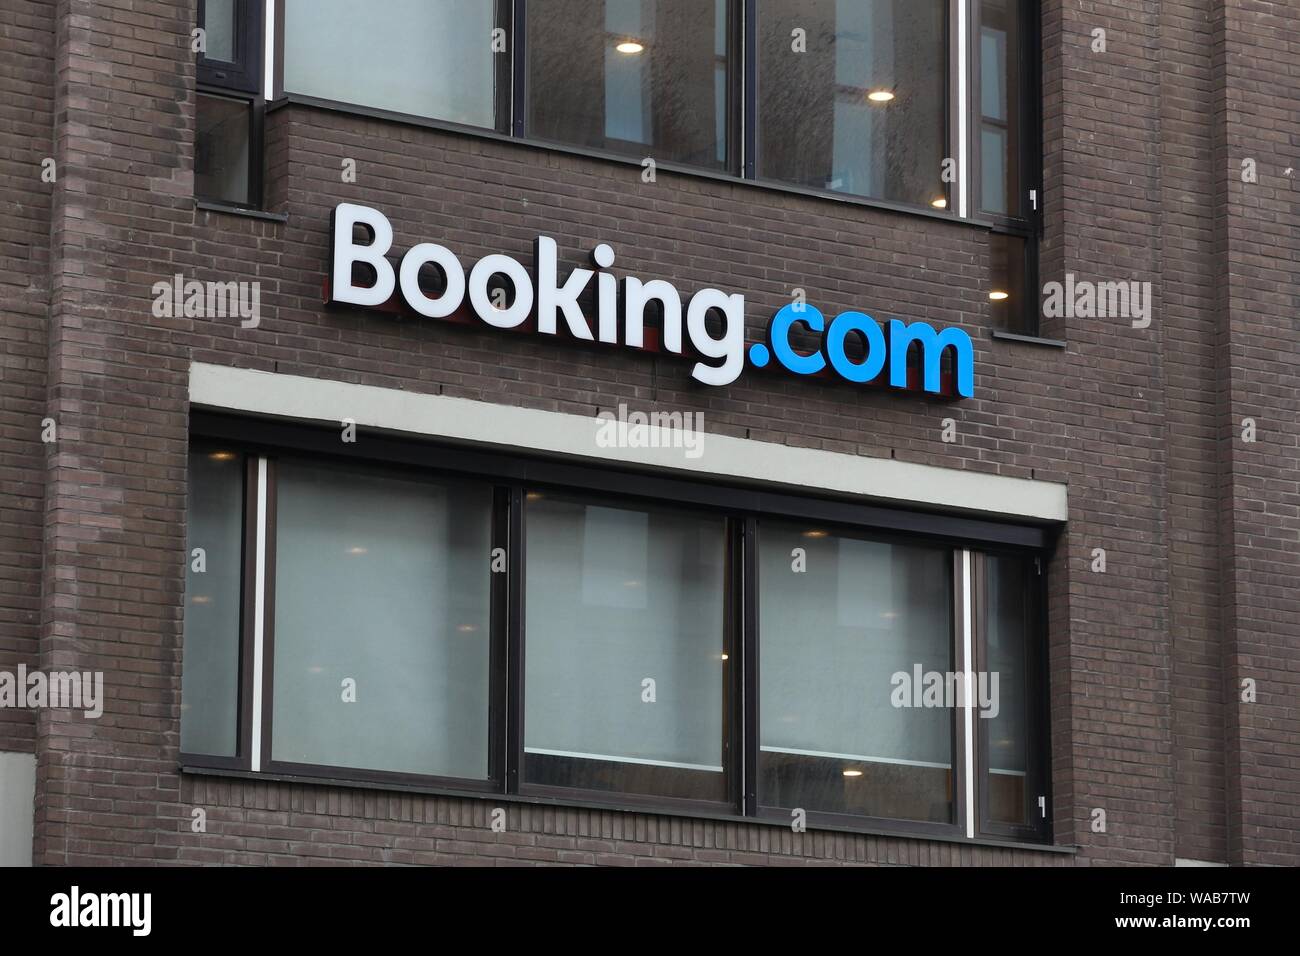 AMSTERDAM, NETHERLANDS - JULY 7, 2017: Headquarters of online hotel reservation giant Booking.com in Amsterdam, Netherlands. Stock Photo